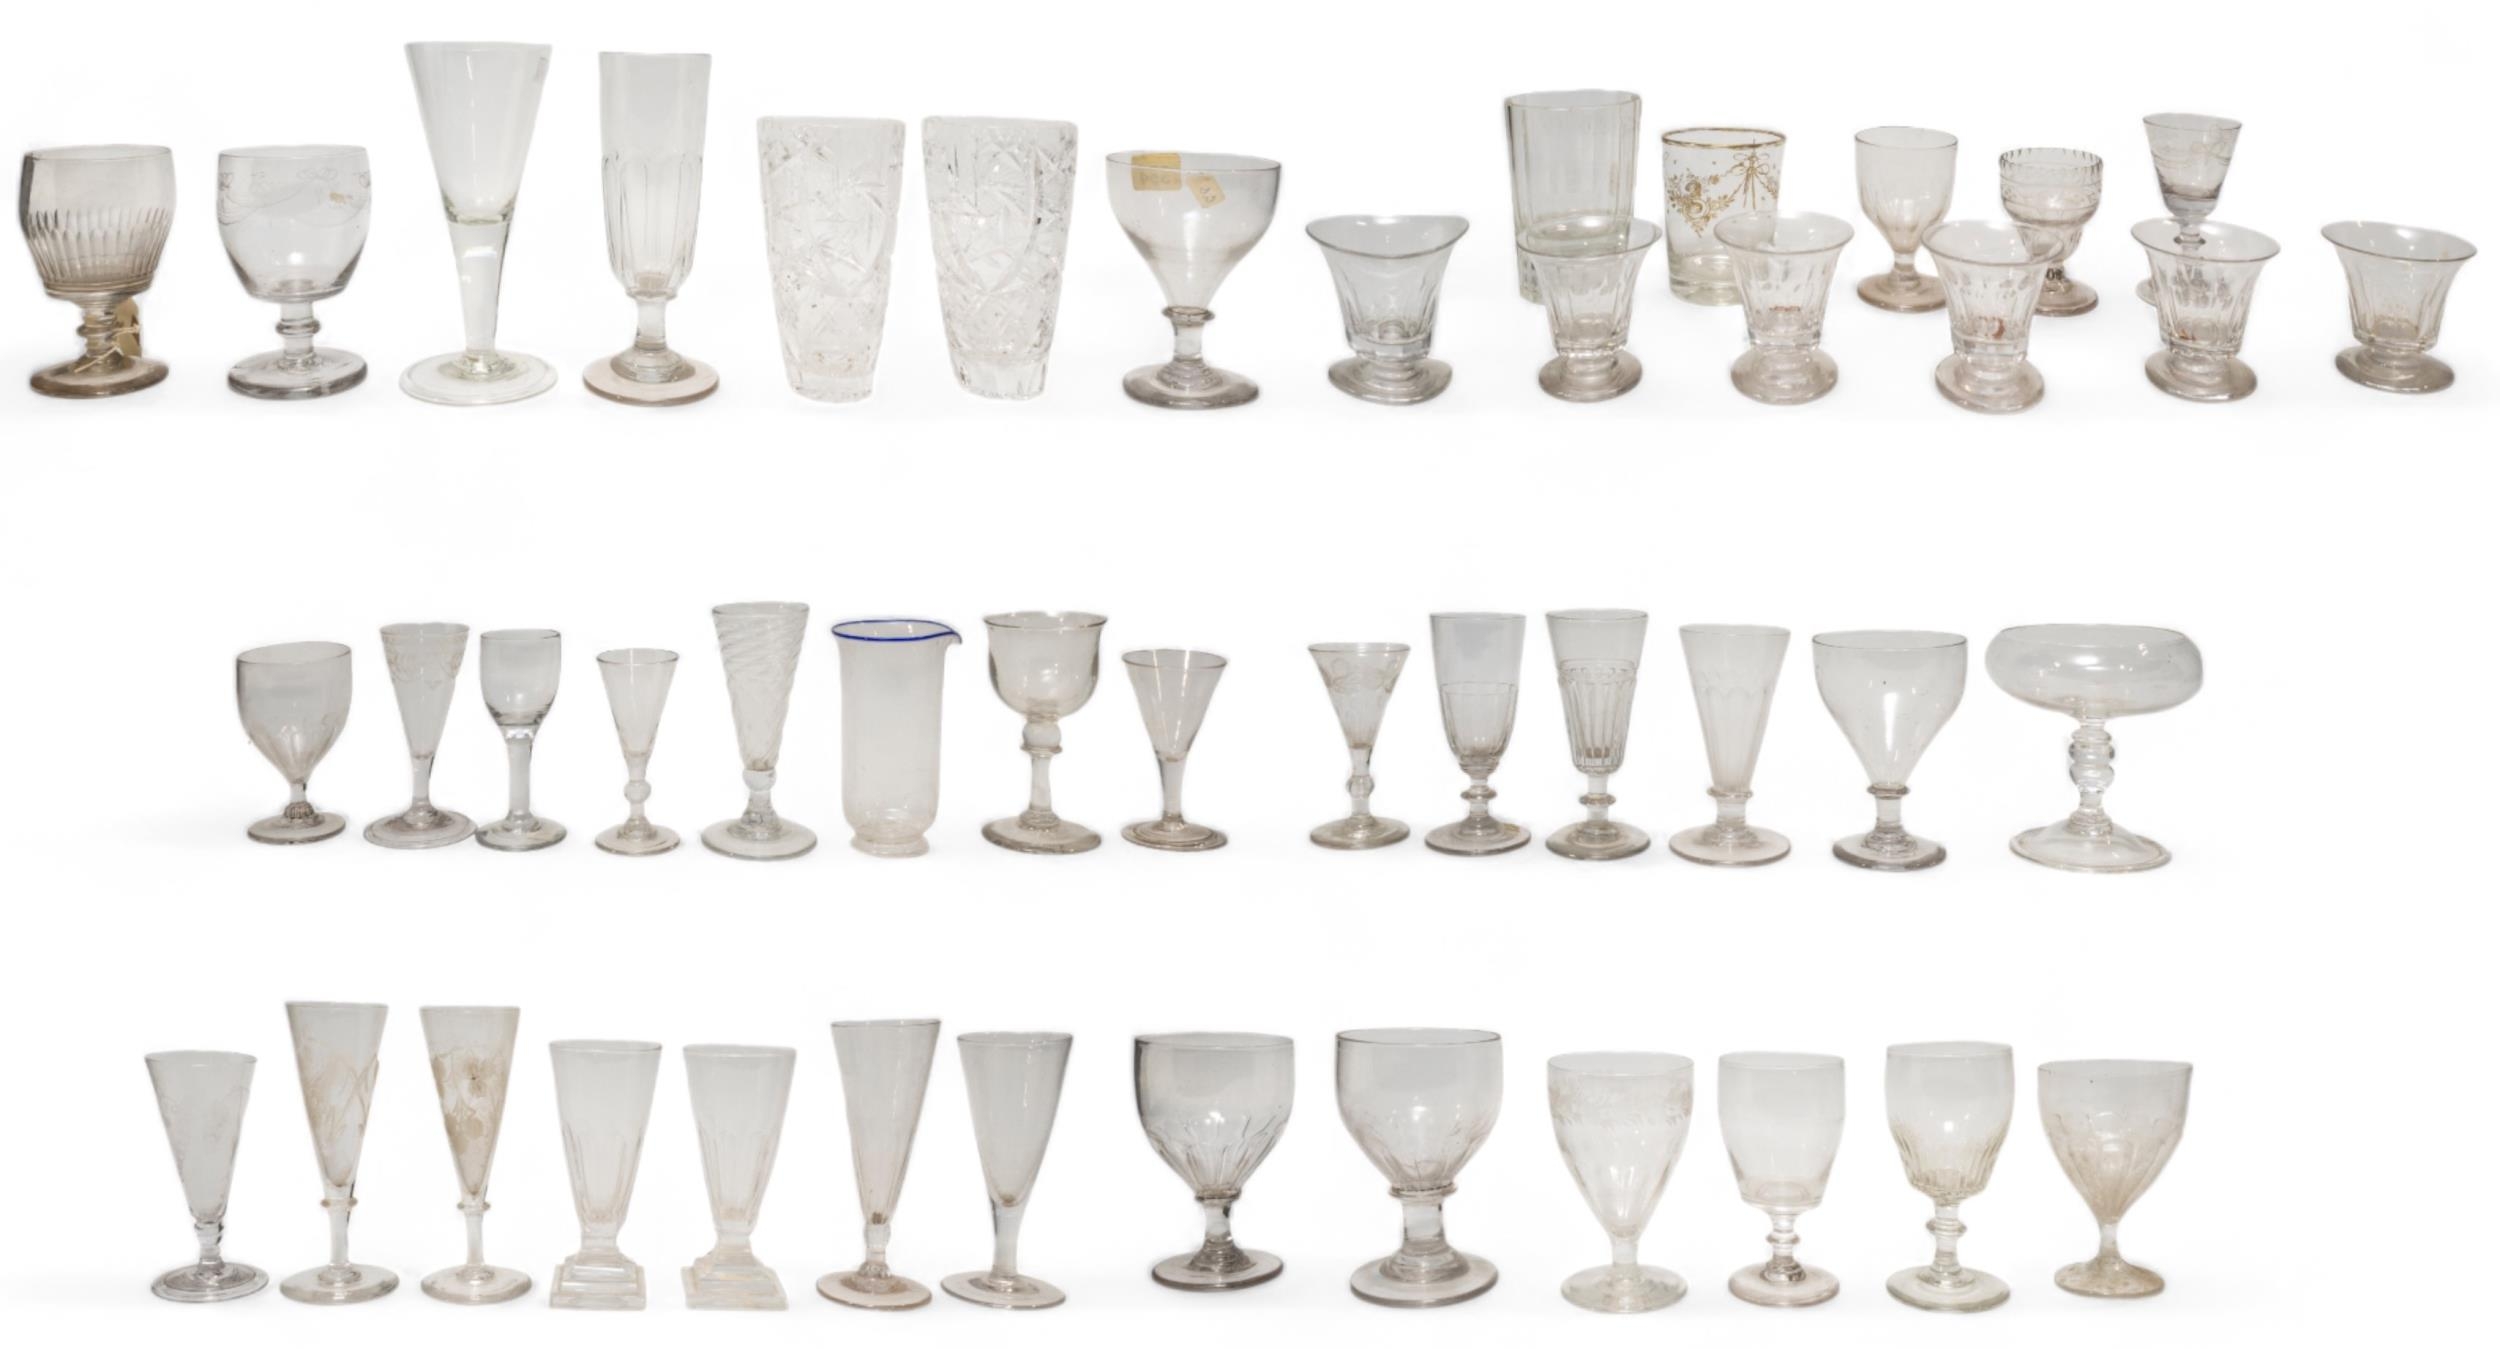 A LARGE MIXED GROUP OF STEMMED GLASSES AND TUMBLERS, PREDOMINANTLY 18TH/19TH CENTURY, the group